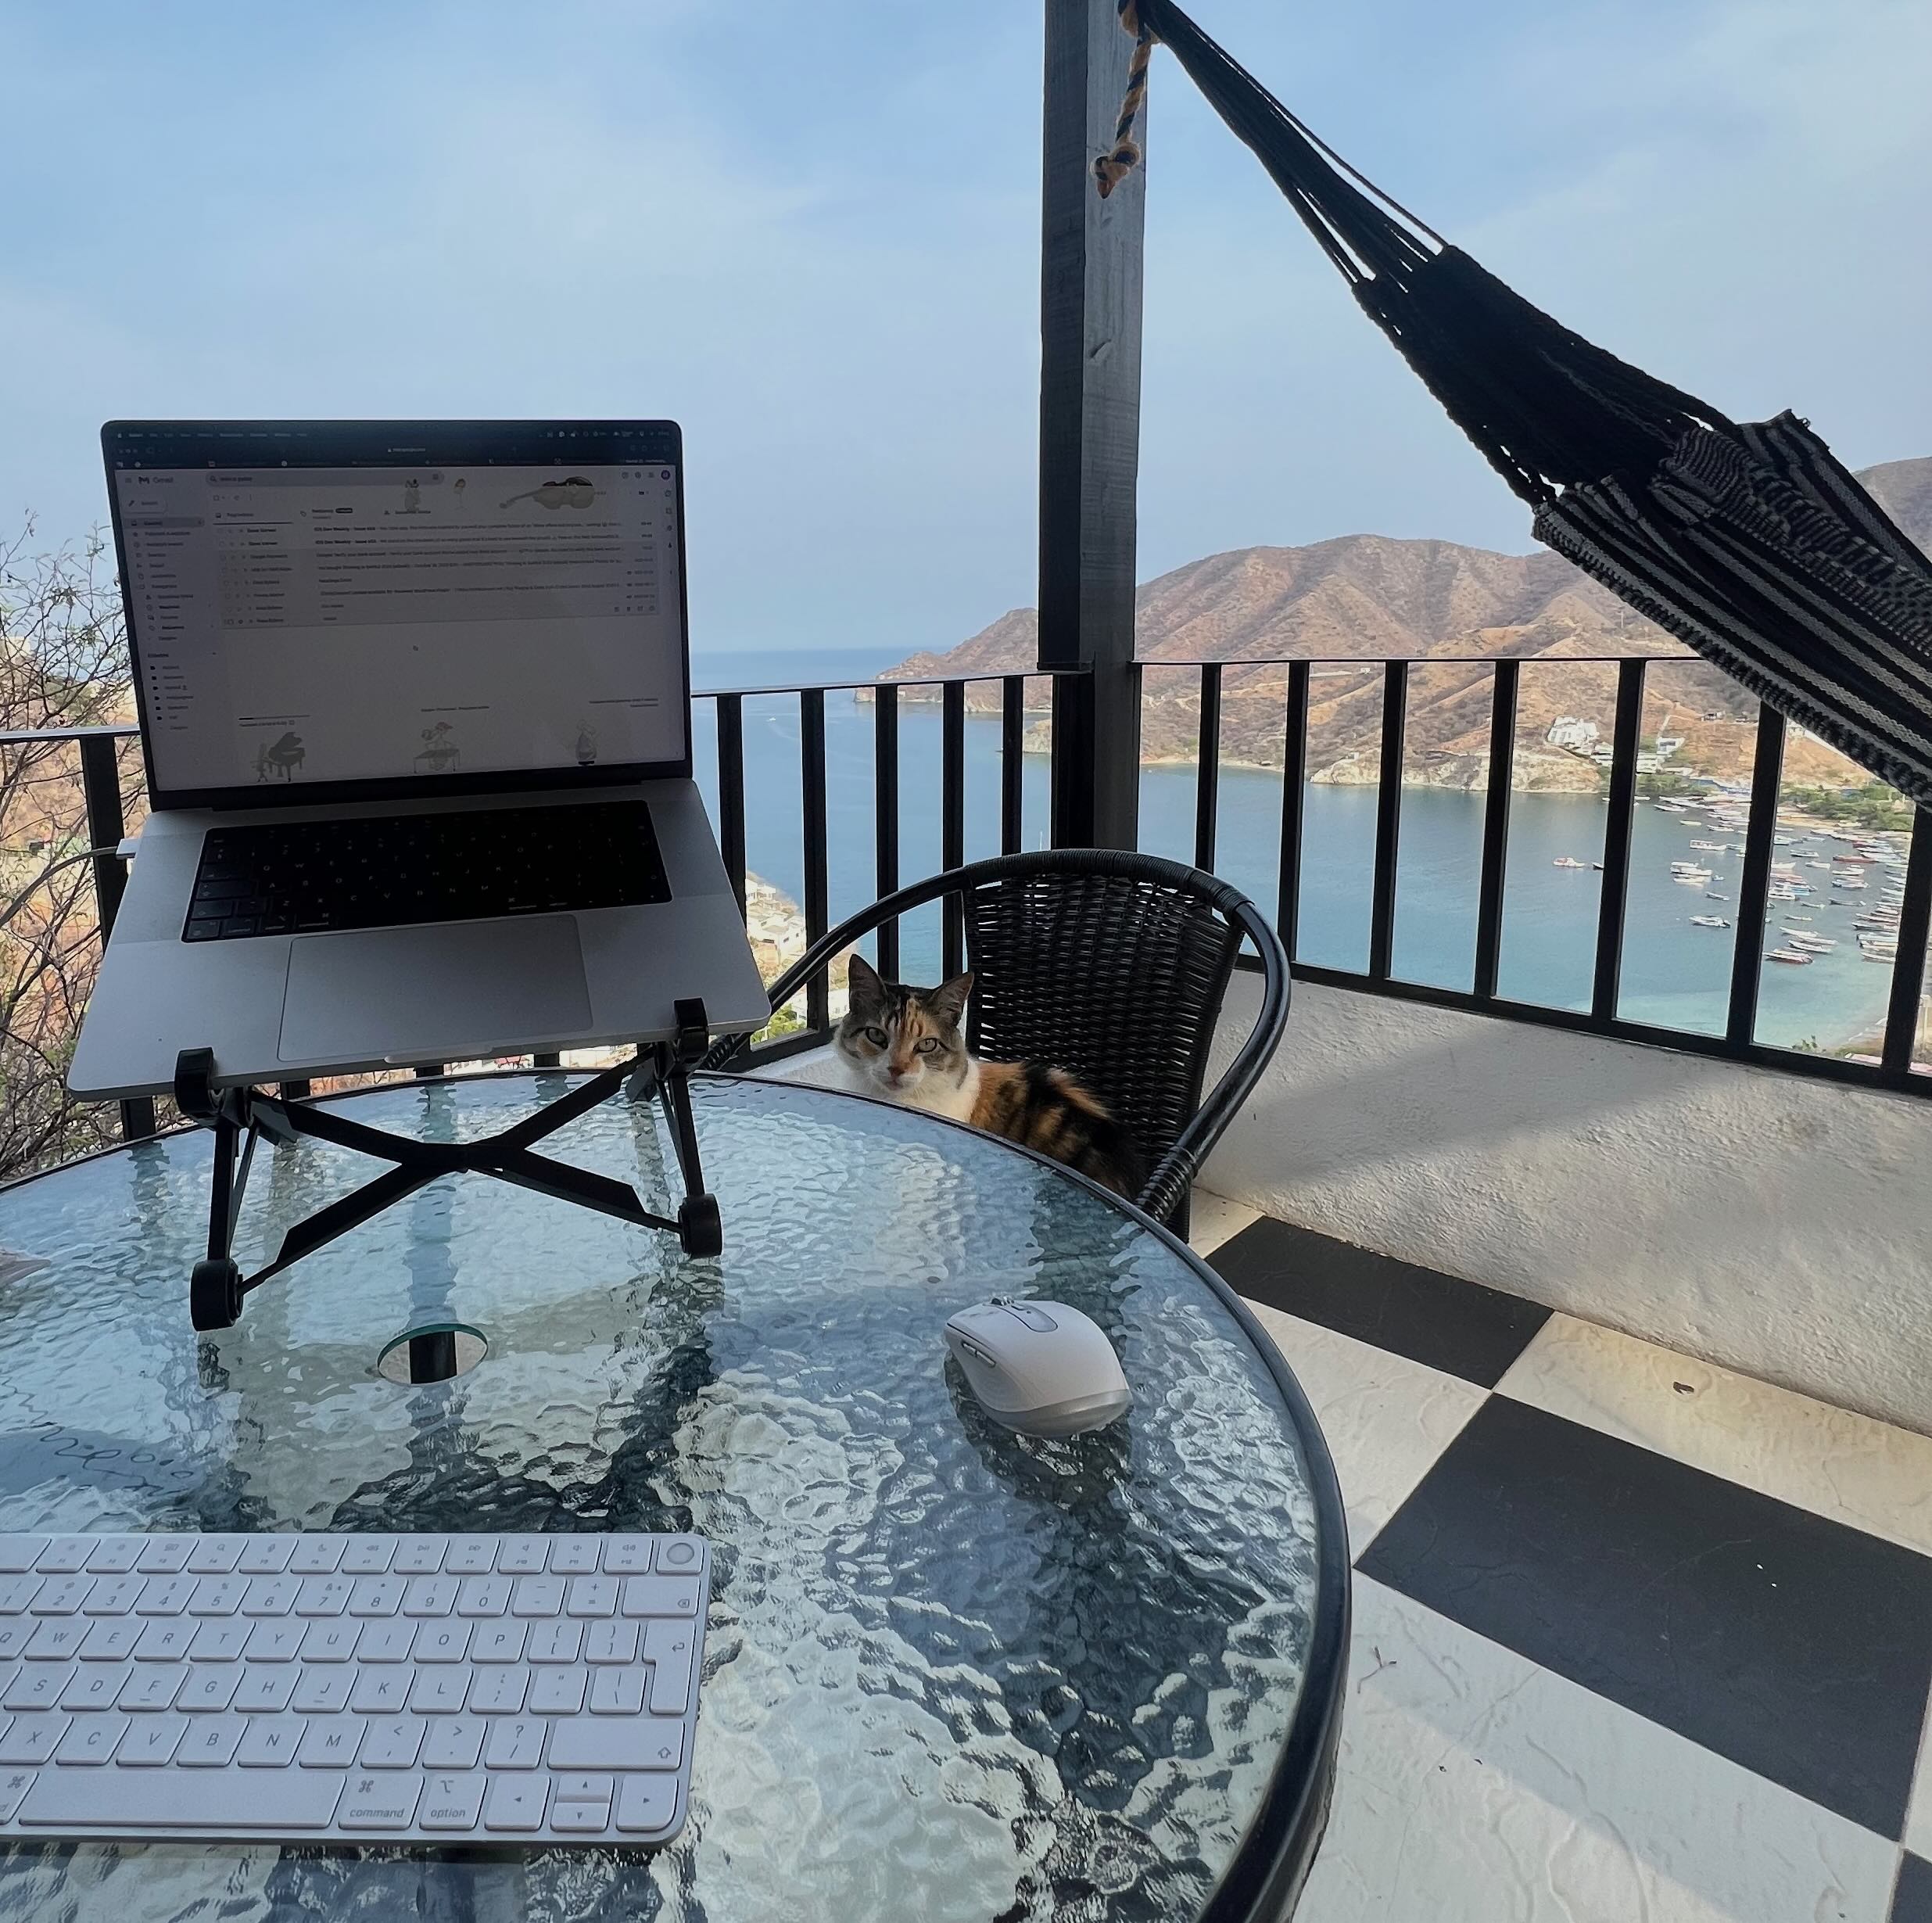 A laptop on a stand sits on a glass table with a keyboard and mouse, overlooking a coastal view of Taganga, Colombia. Raúl is sitting on a chair next to the table, and a hammock is hanging nearby.